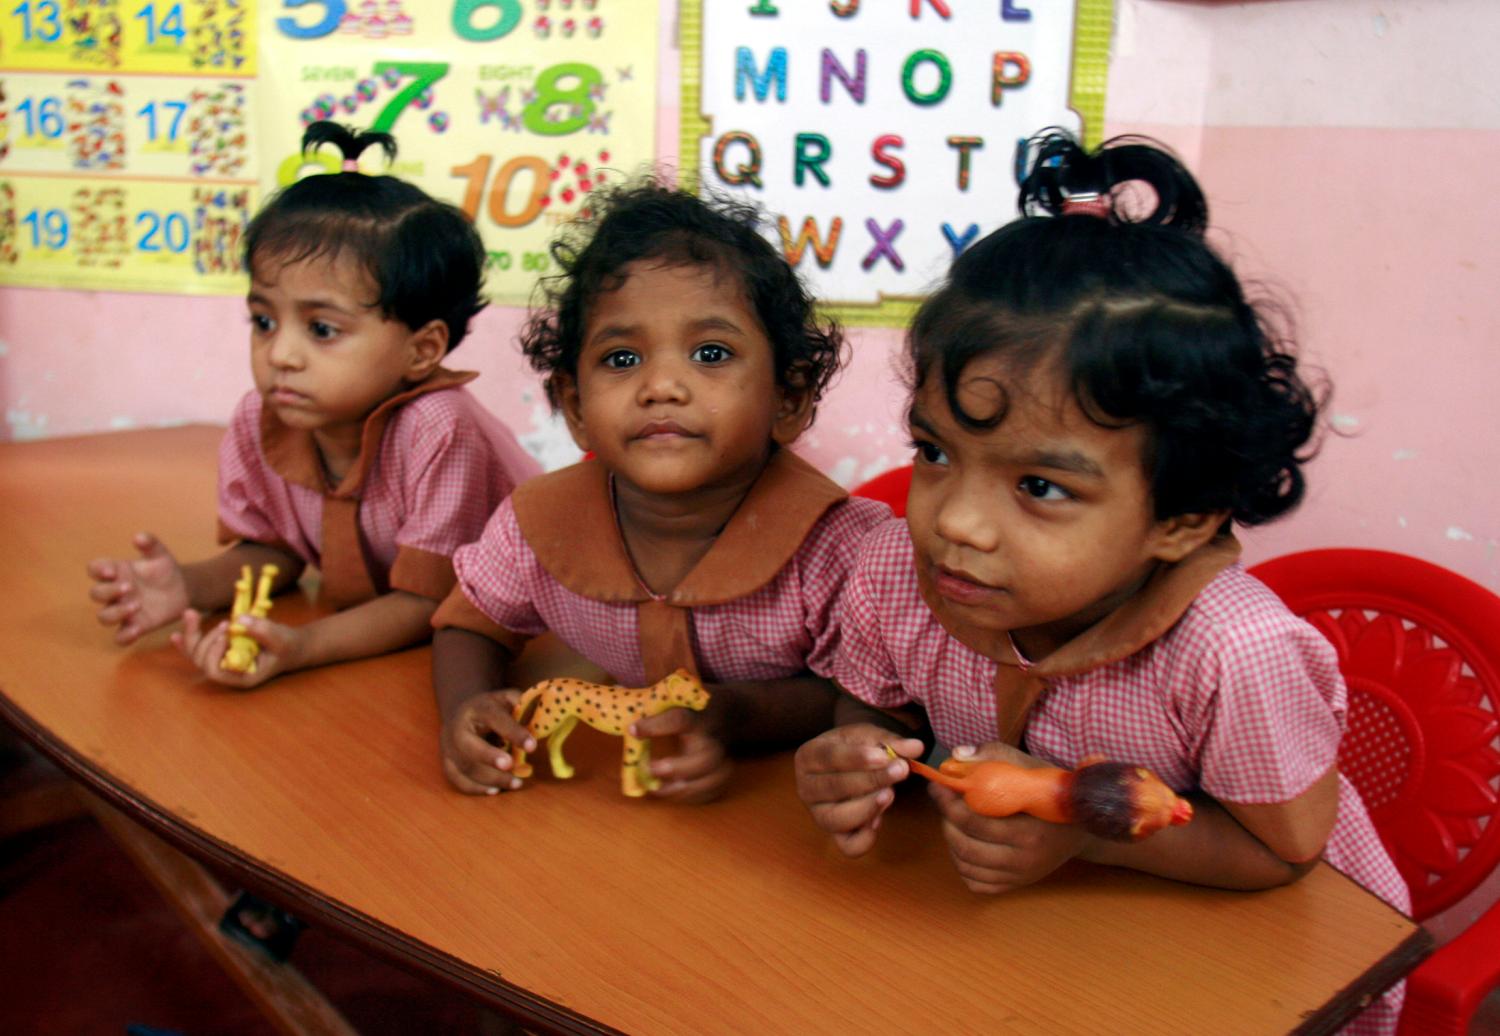 Girls attend a class at "Shishu Bhavan", a home for orphans run by the Global Missionaries of Charity order of nuns, in the eastern Indian city of Kolkata September 4, 2007. REUTERS/Jayanta Shaw (INDIA) - GM1DWBSTPEAA